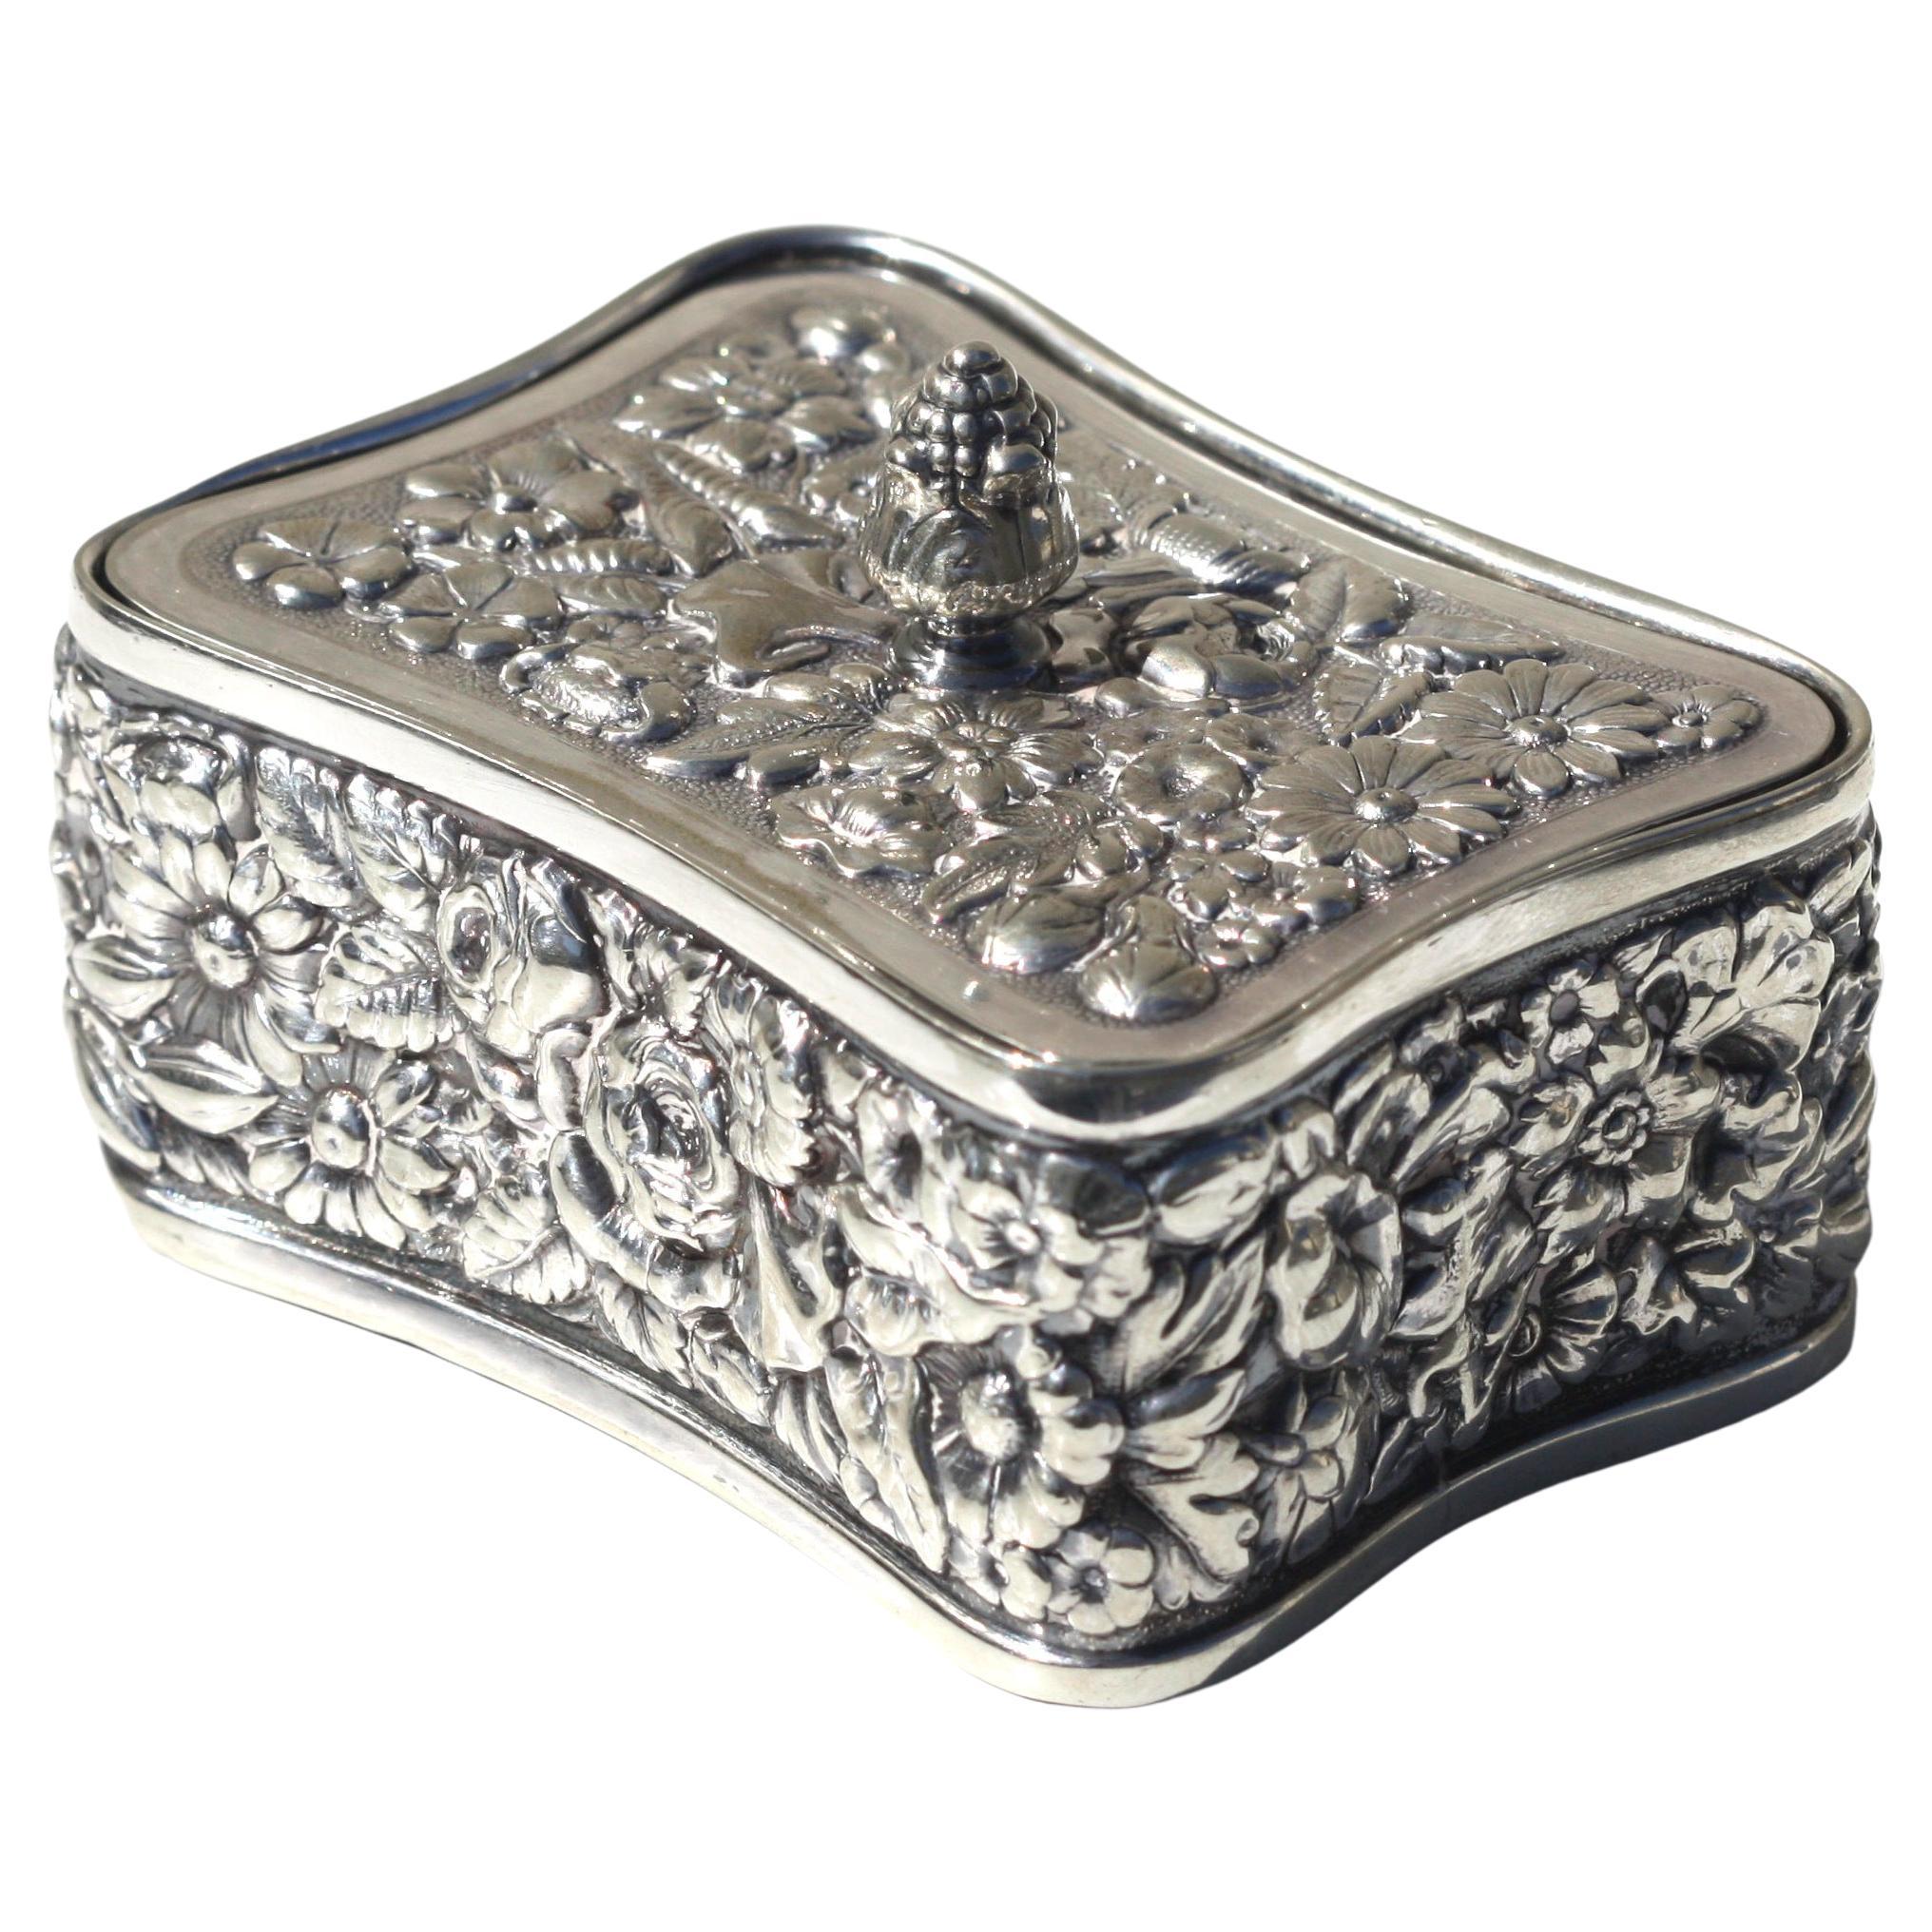 Tiffany & Co. Silver-Soldered Stamp Box and Cover For Sale